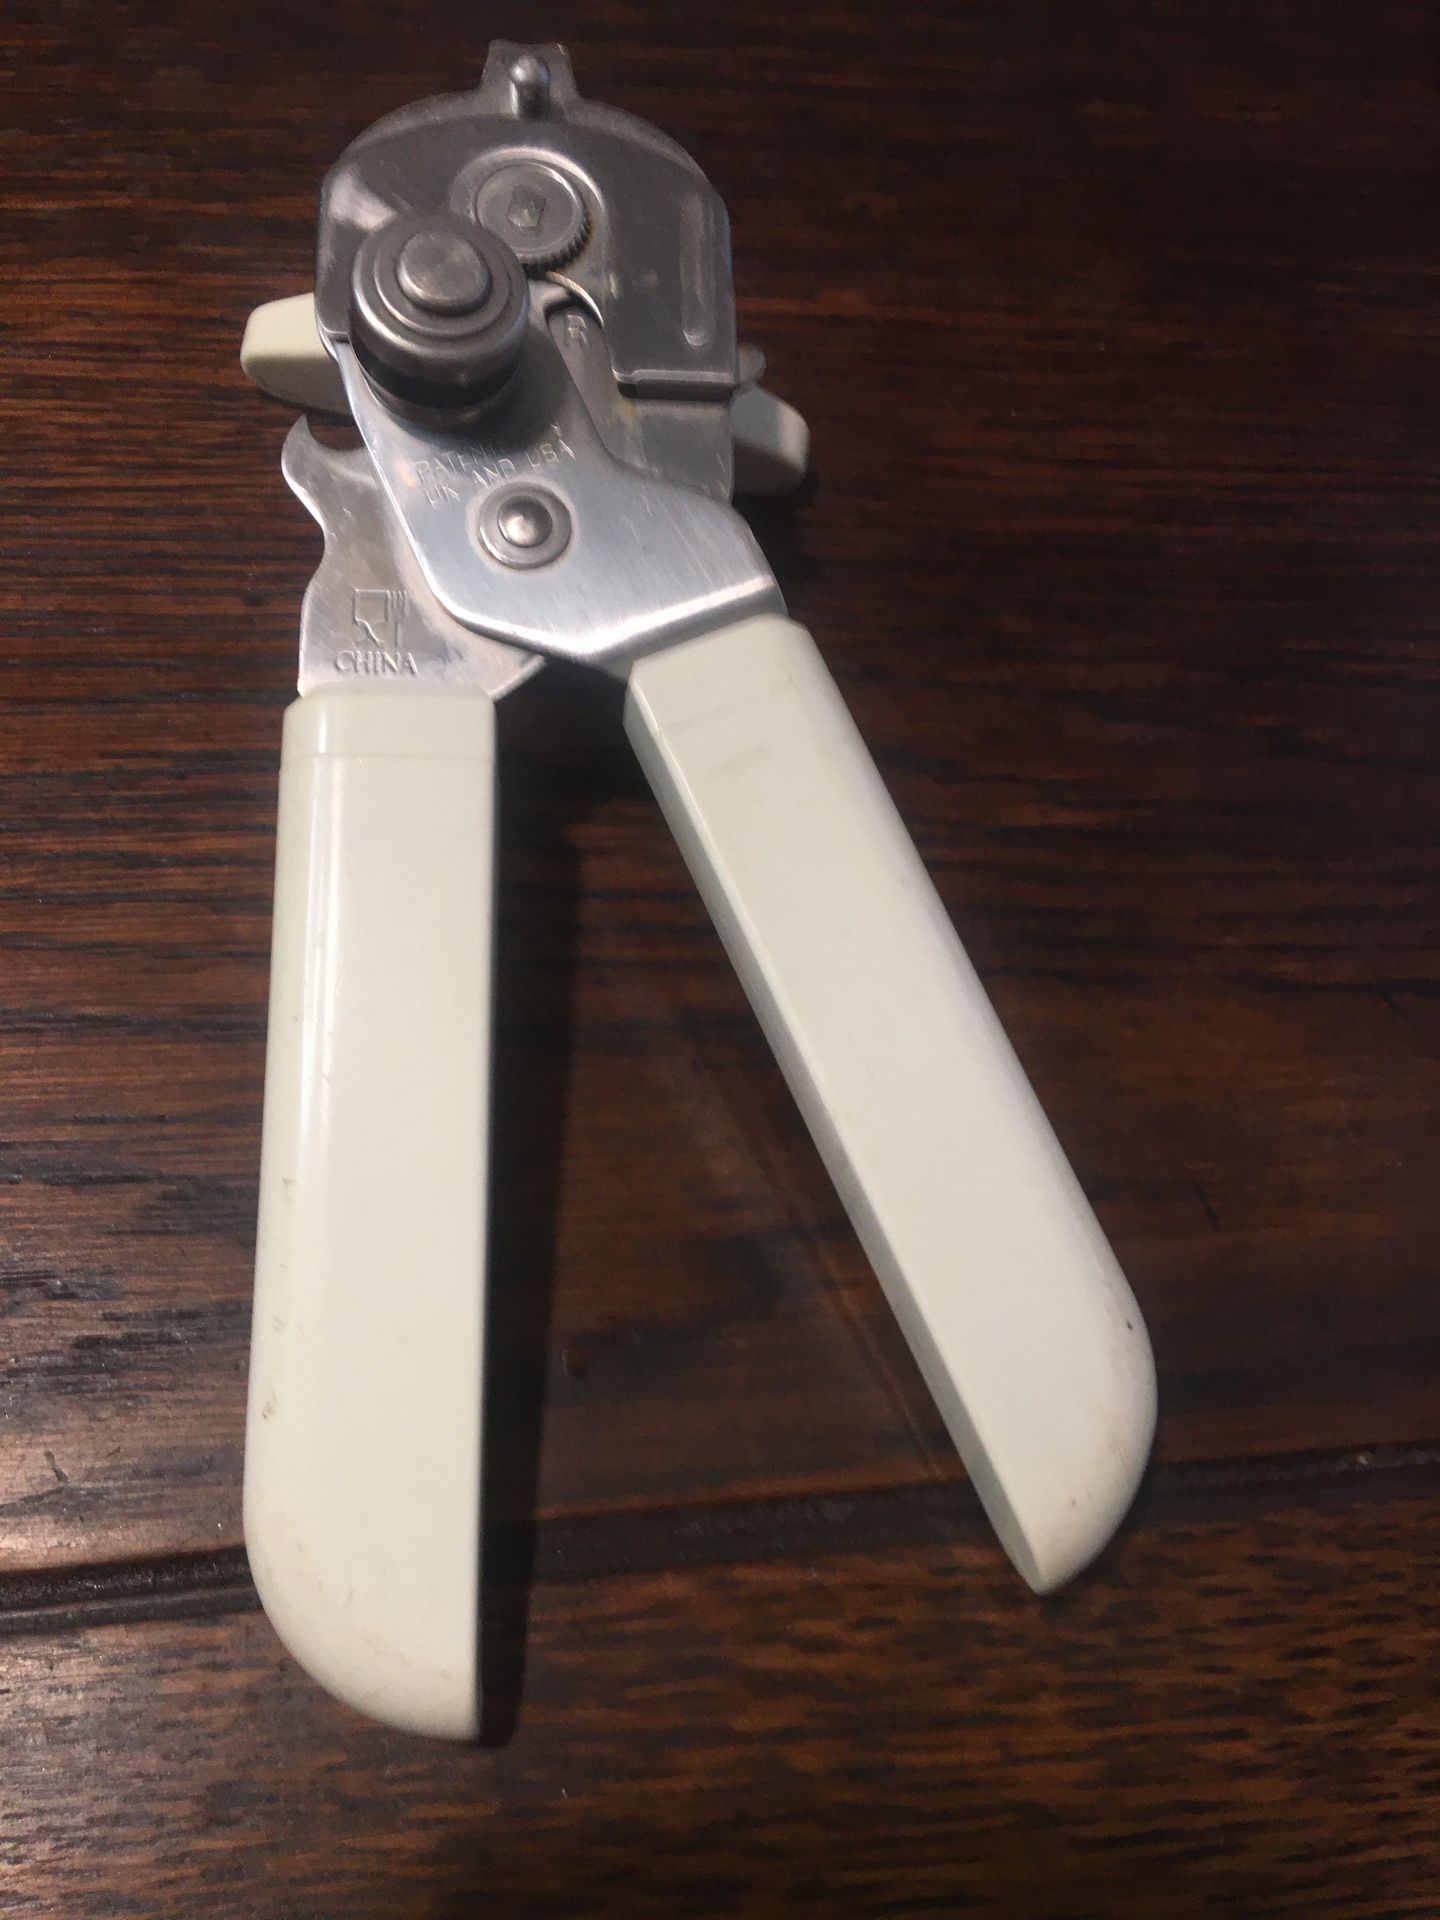 Pampered Chef White Can Openers